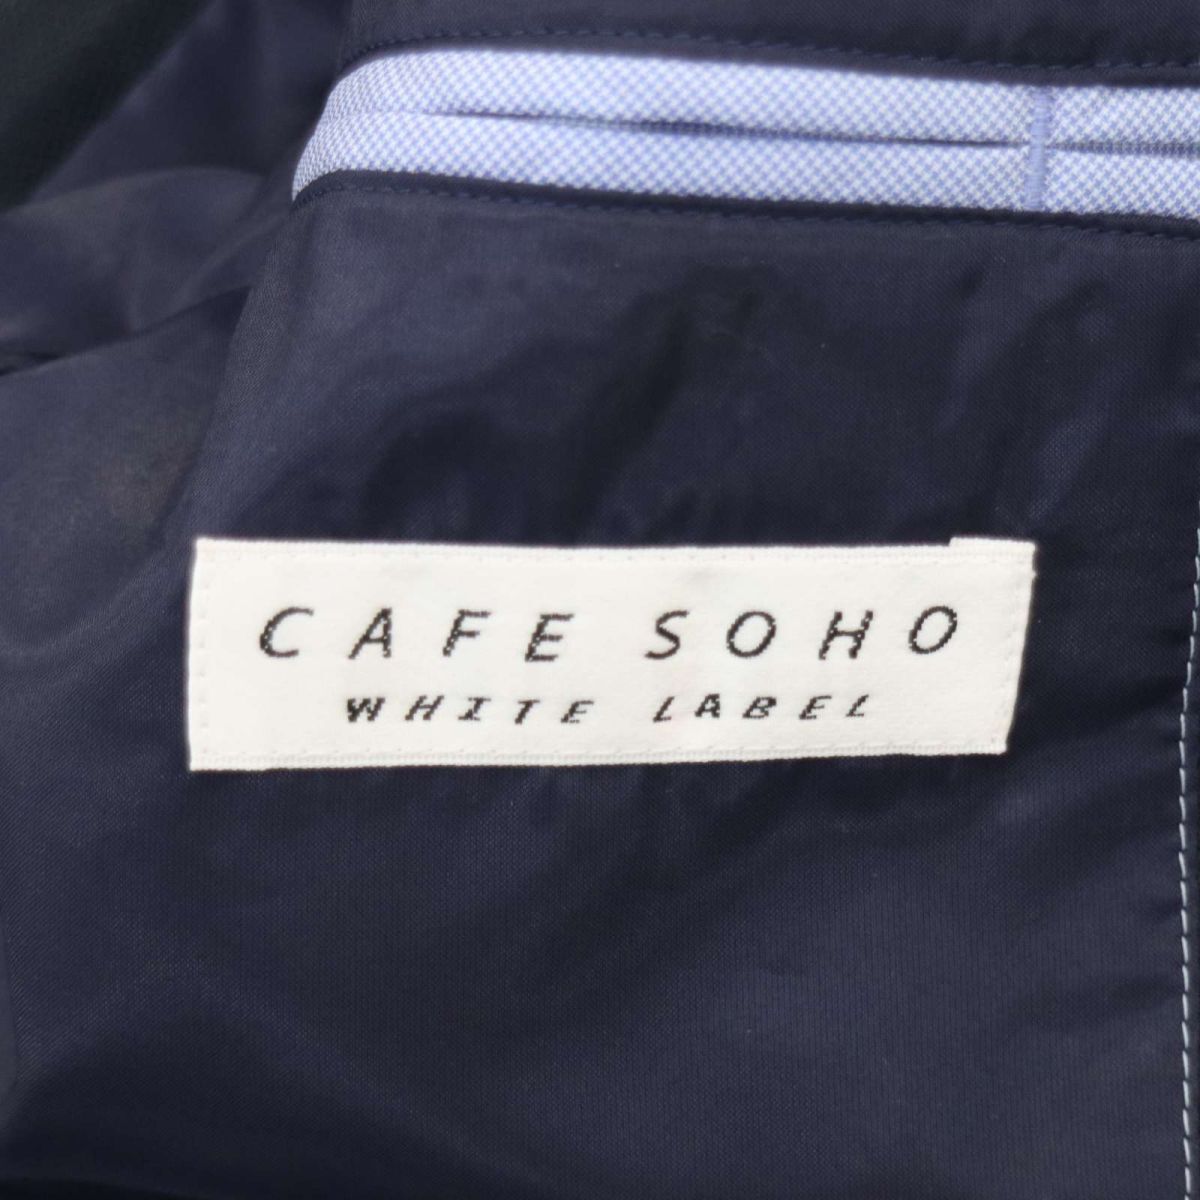  beautiful goods * CAFE SOHO Cafe so- horn spring summer unlined in the back stretch Anne navy blue tailored jacket Sz.Y4 men's navy bijikajiA4T01959_2#M